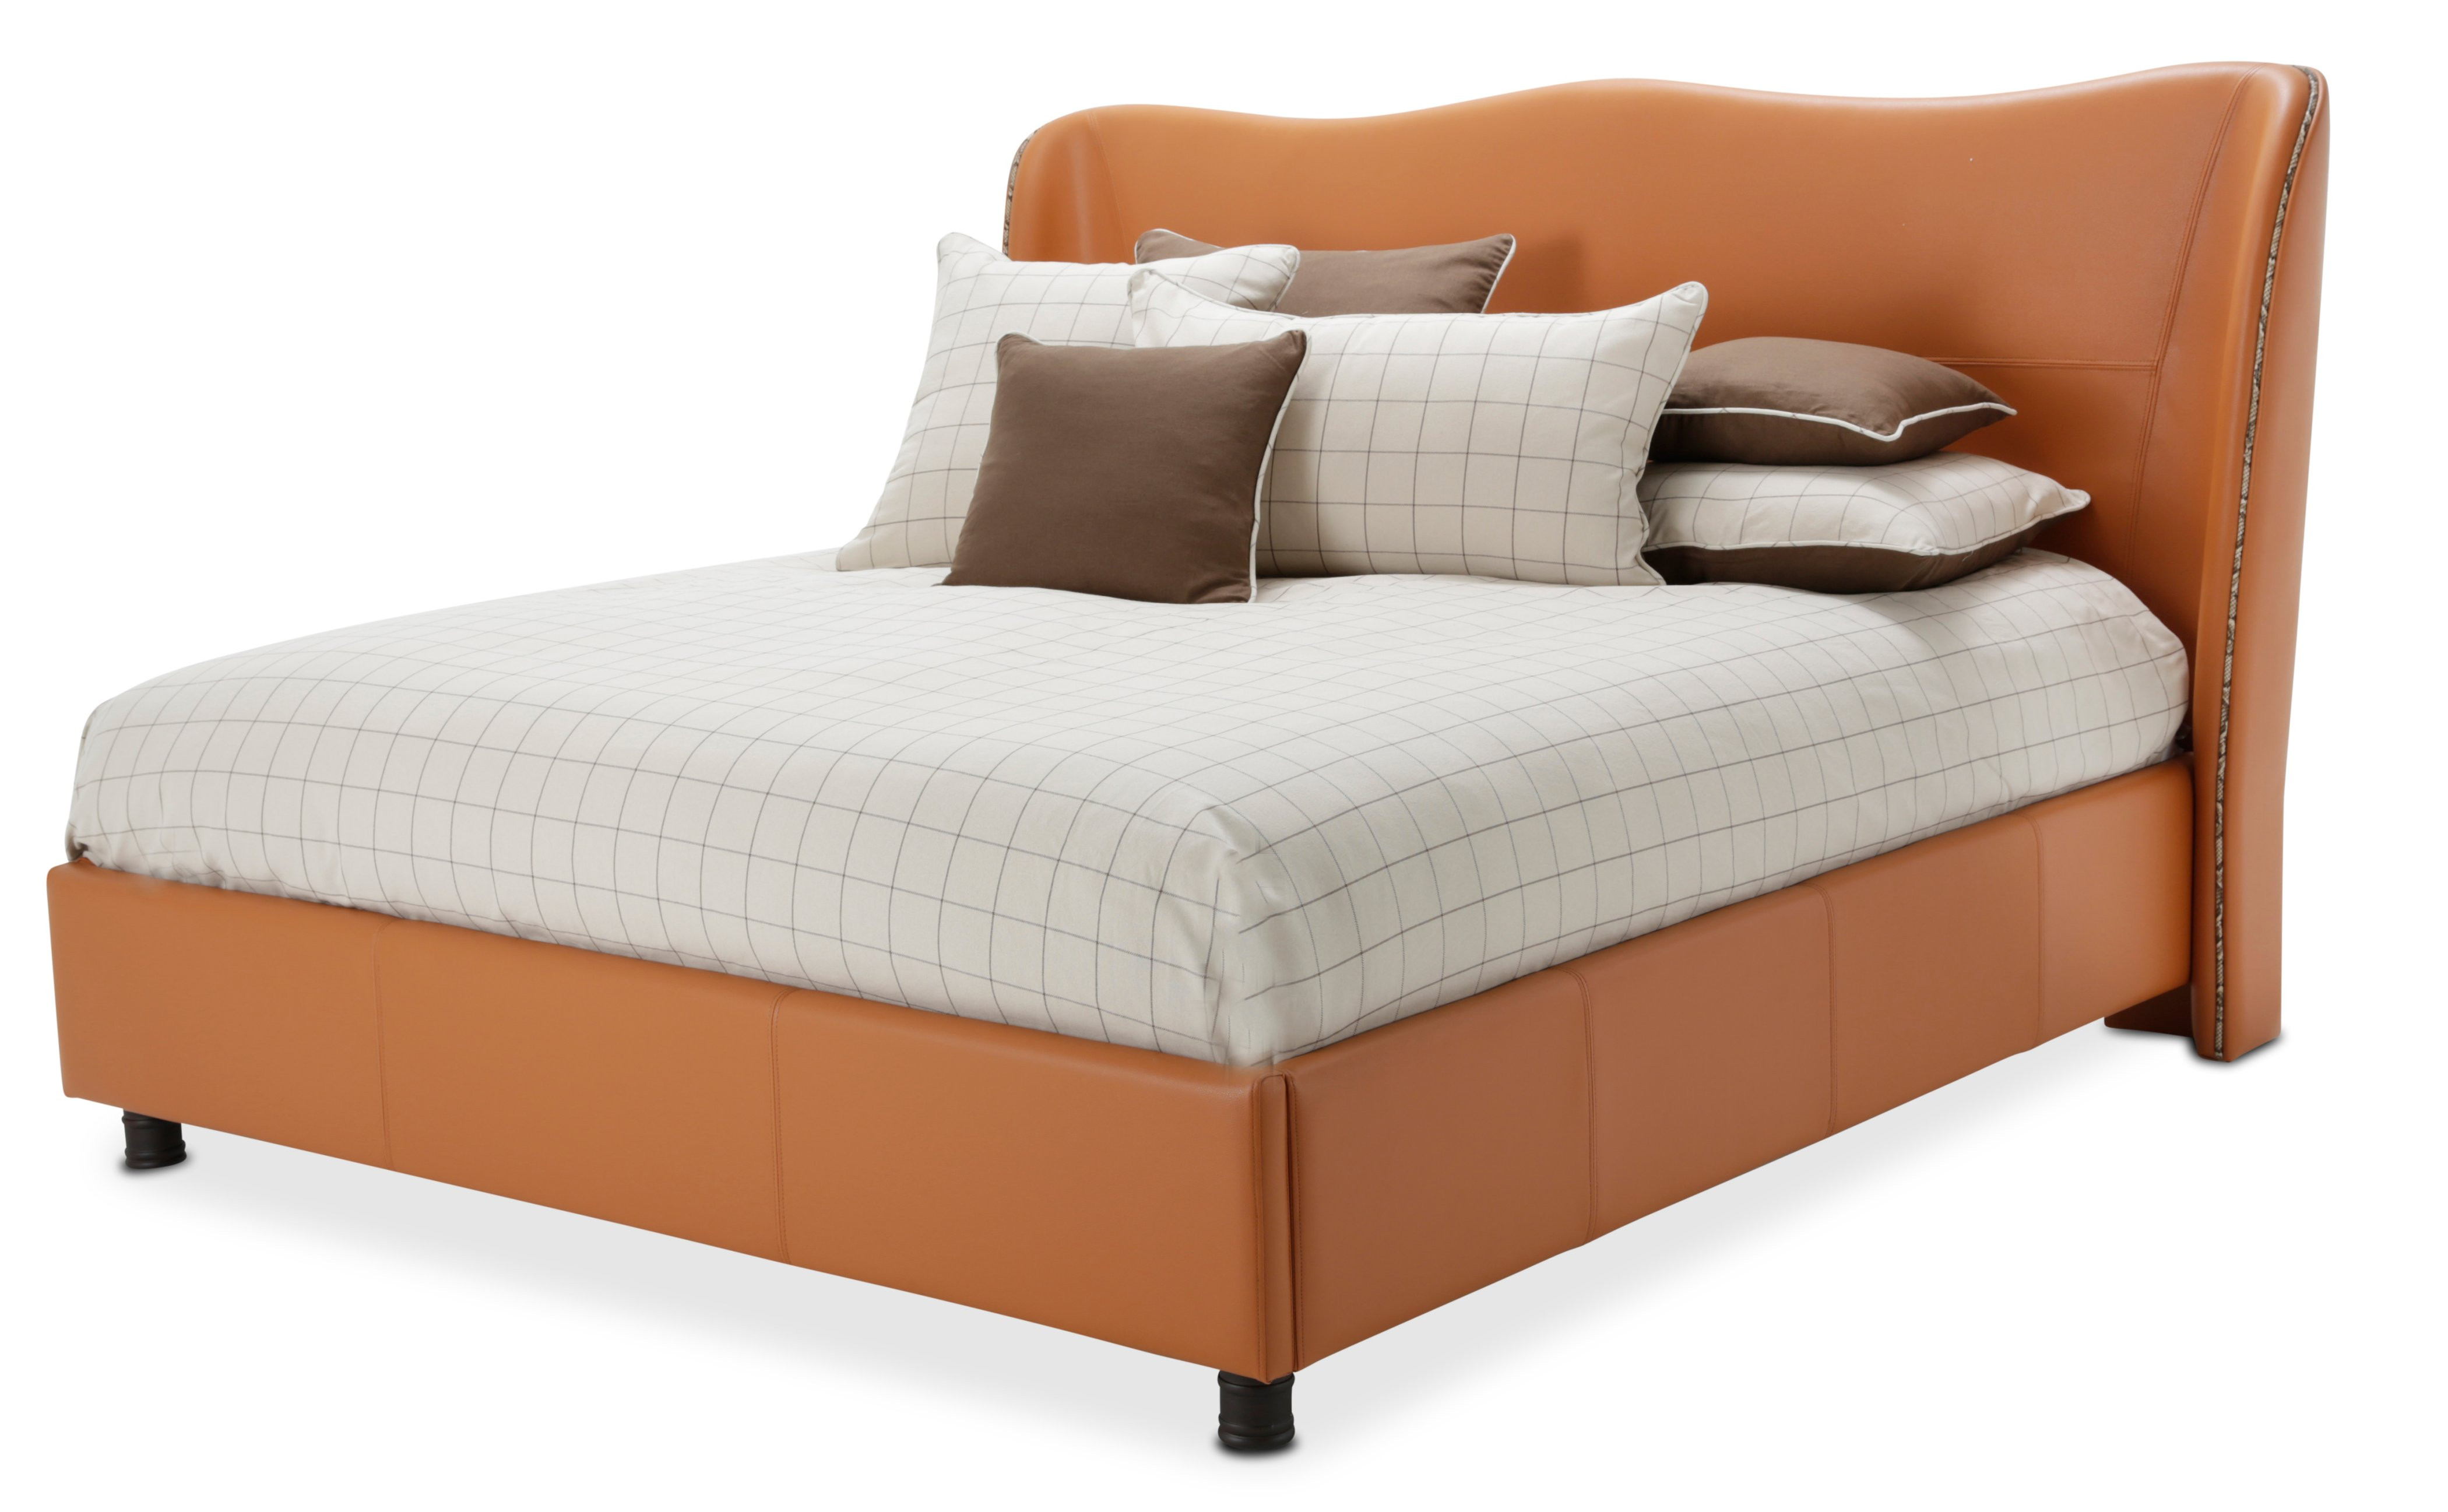 King Upholstered Wing Bed